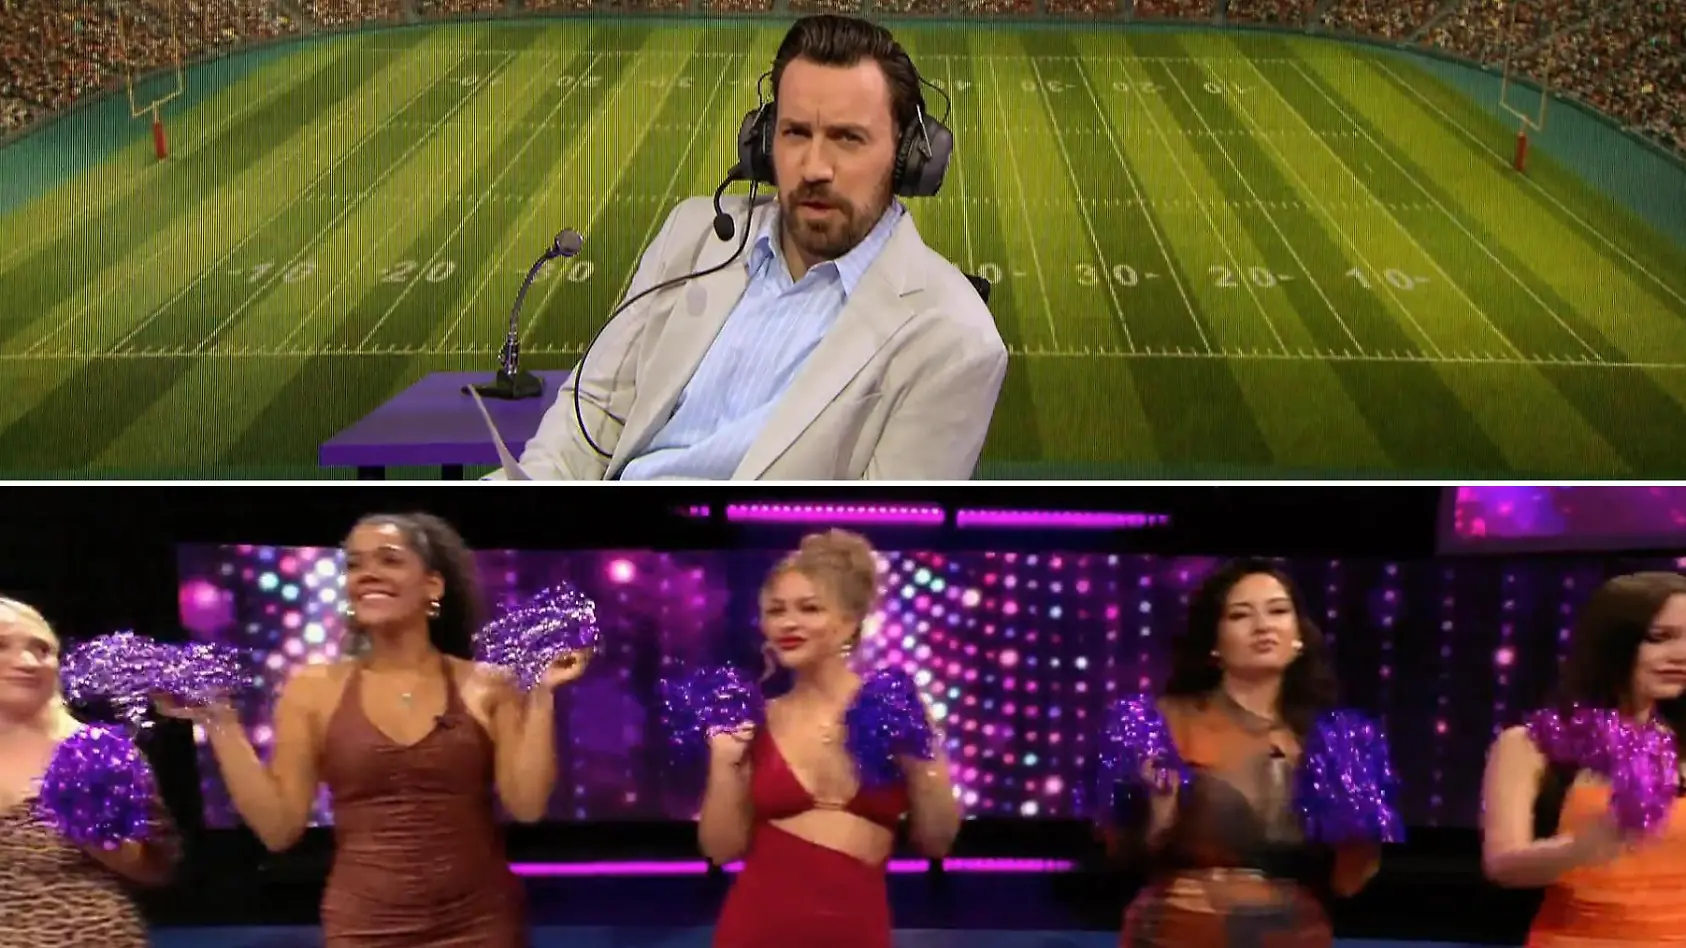 Football-Special bei „Take Me Out“